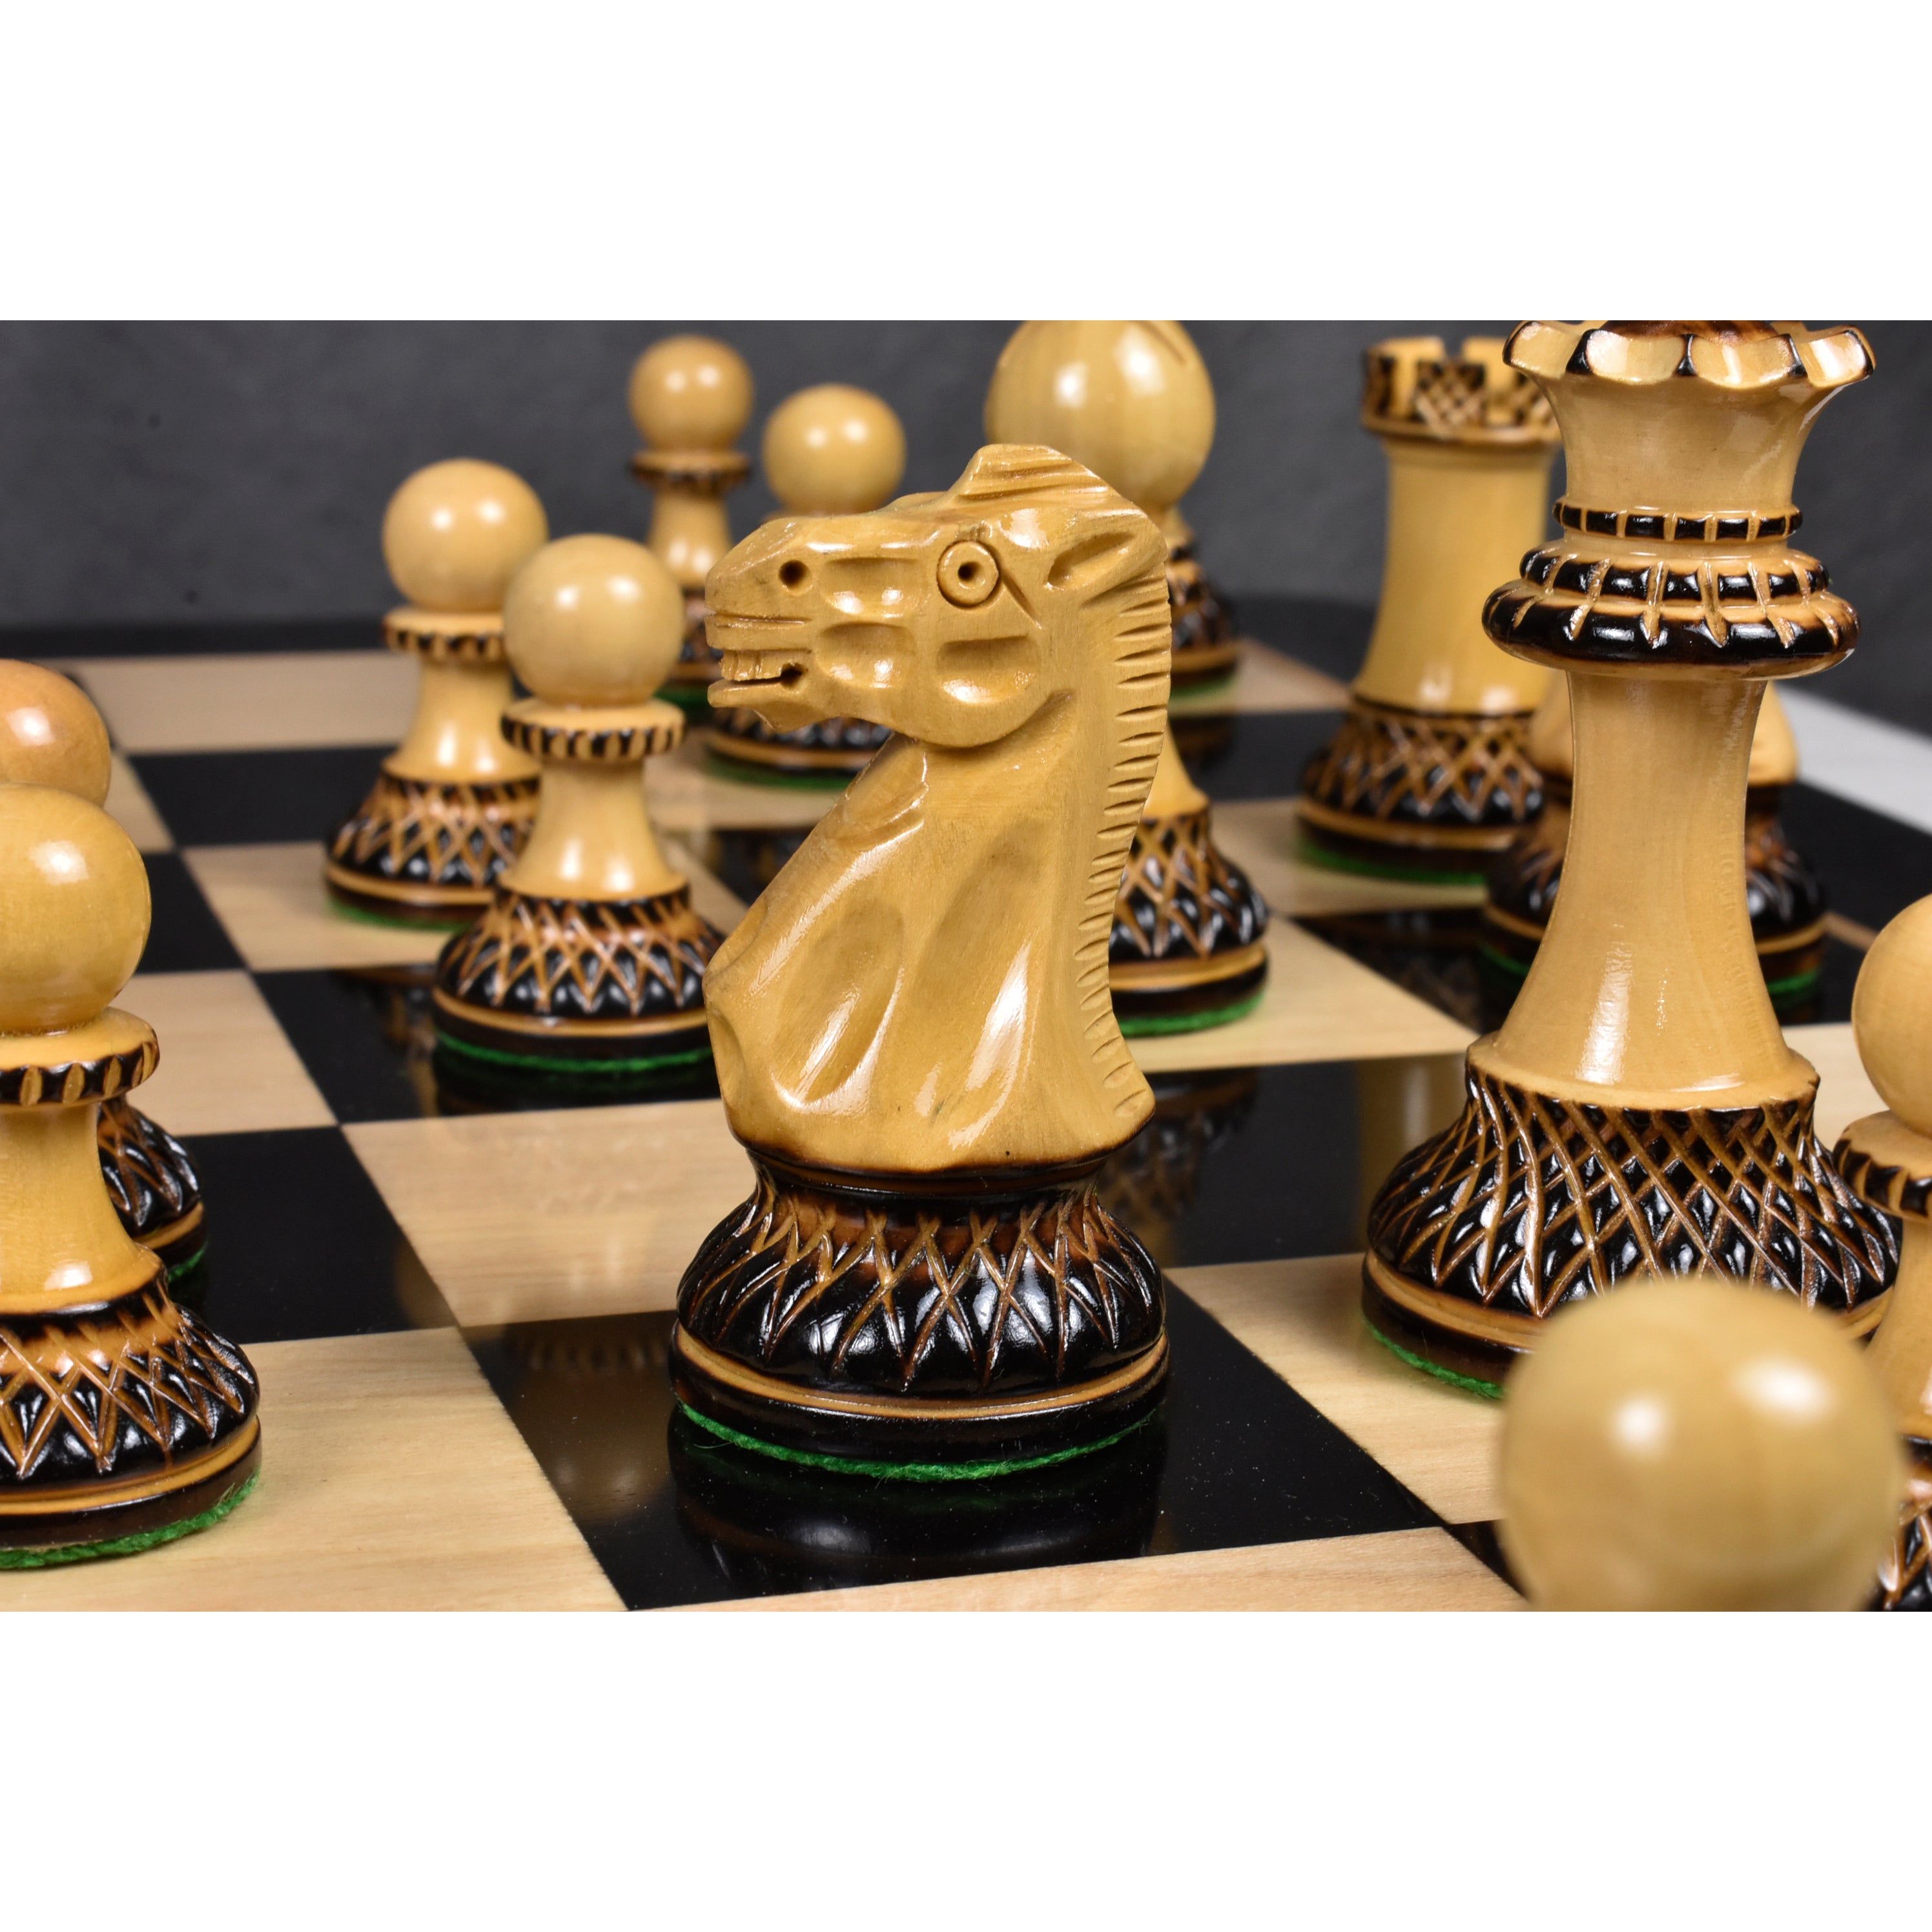 3.9" Parker Staunton Carved Chess Set Combo - Pieces in Lacquered Burnt Boxwood with Board and Box